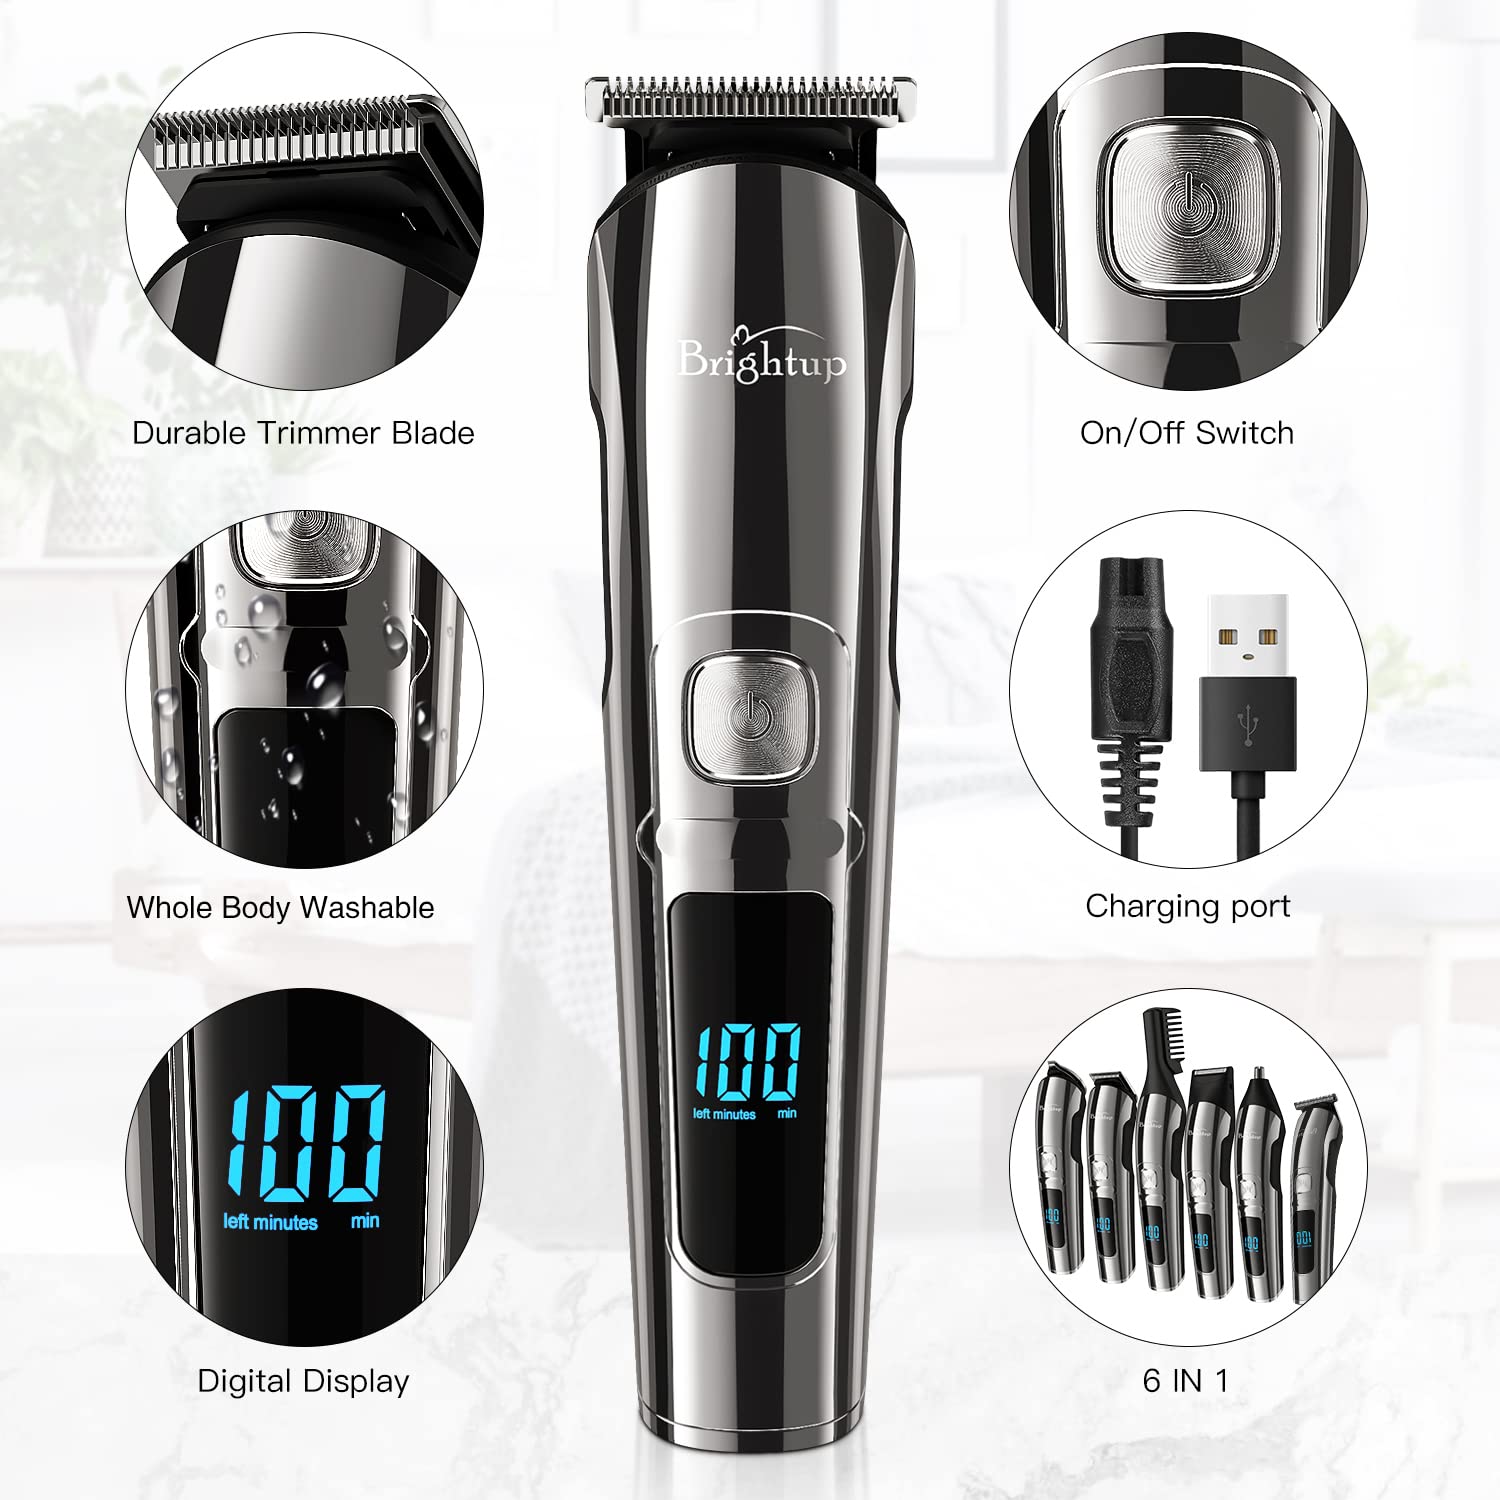 Brightup Beard Trimmer for Men - 19 Piece Beard Trimming Kit with Hair Clippers, Electric Razor - IPX7 Waterproof Mustache, Face, Nose, Ear, Balls, Body Shavers - Ideal Gifts, FK-8688T